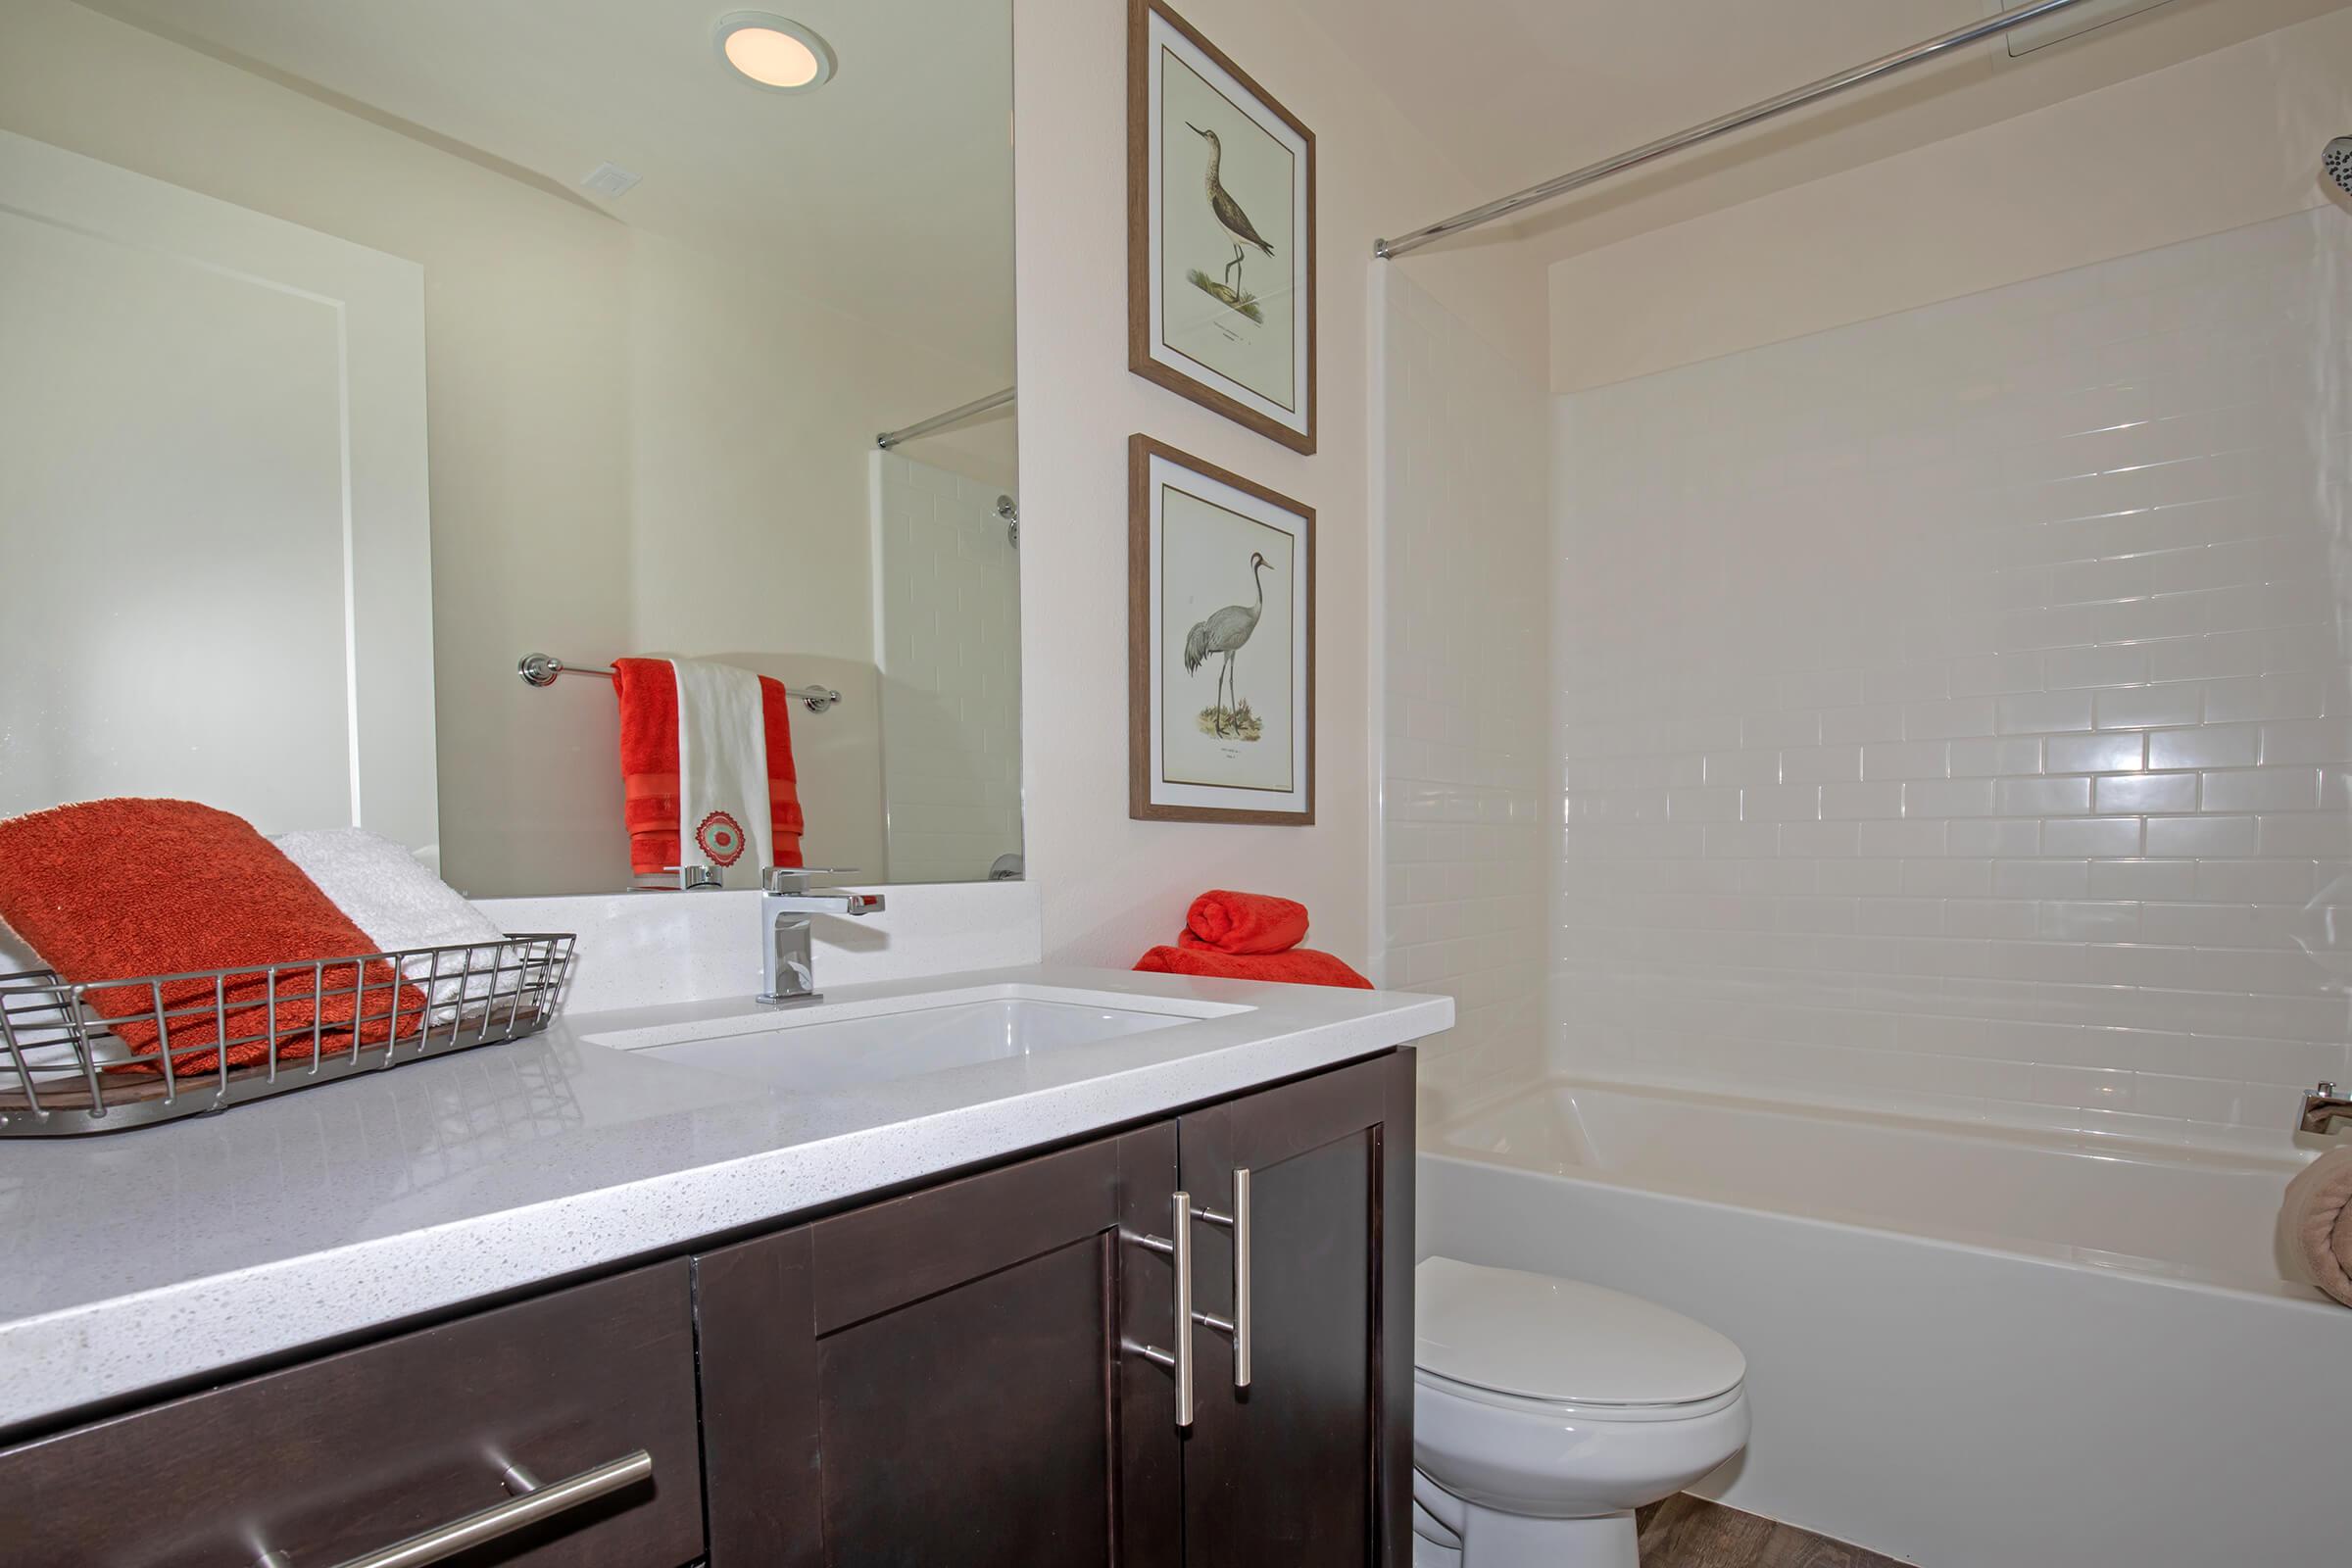 furnished bathroom with white countertops